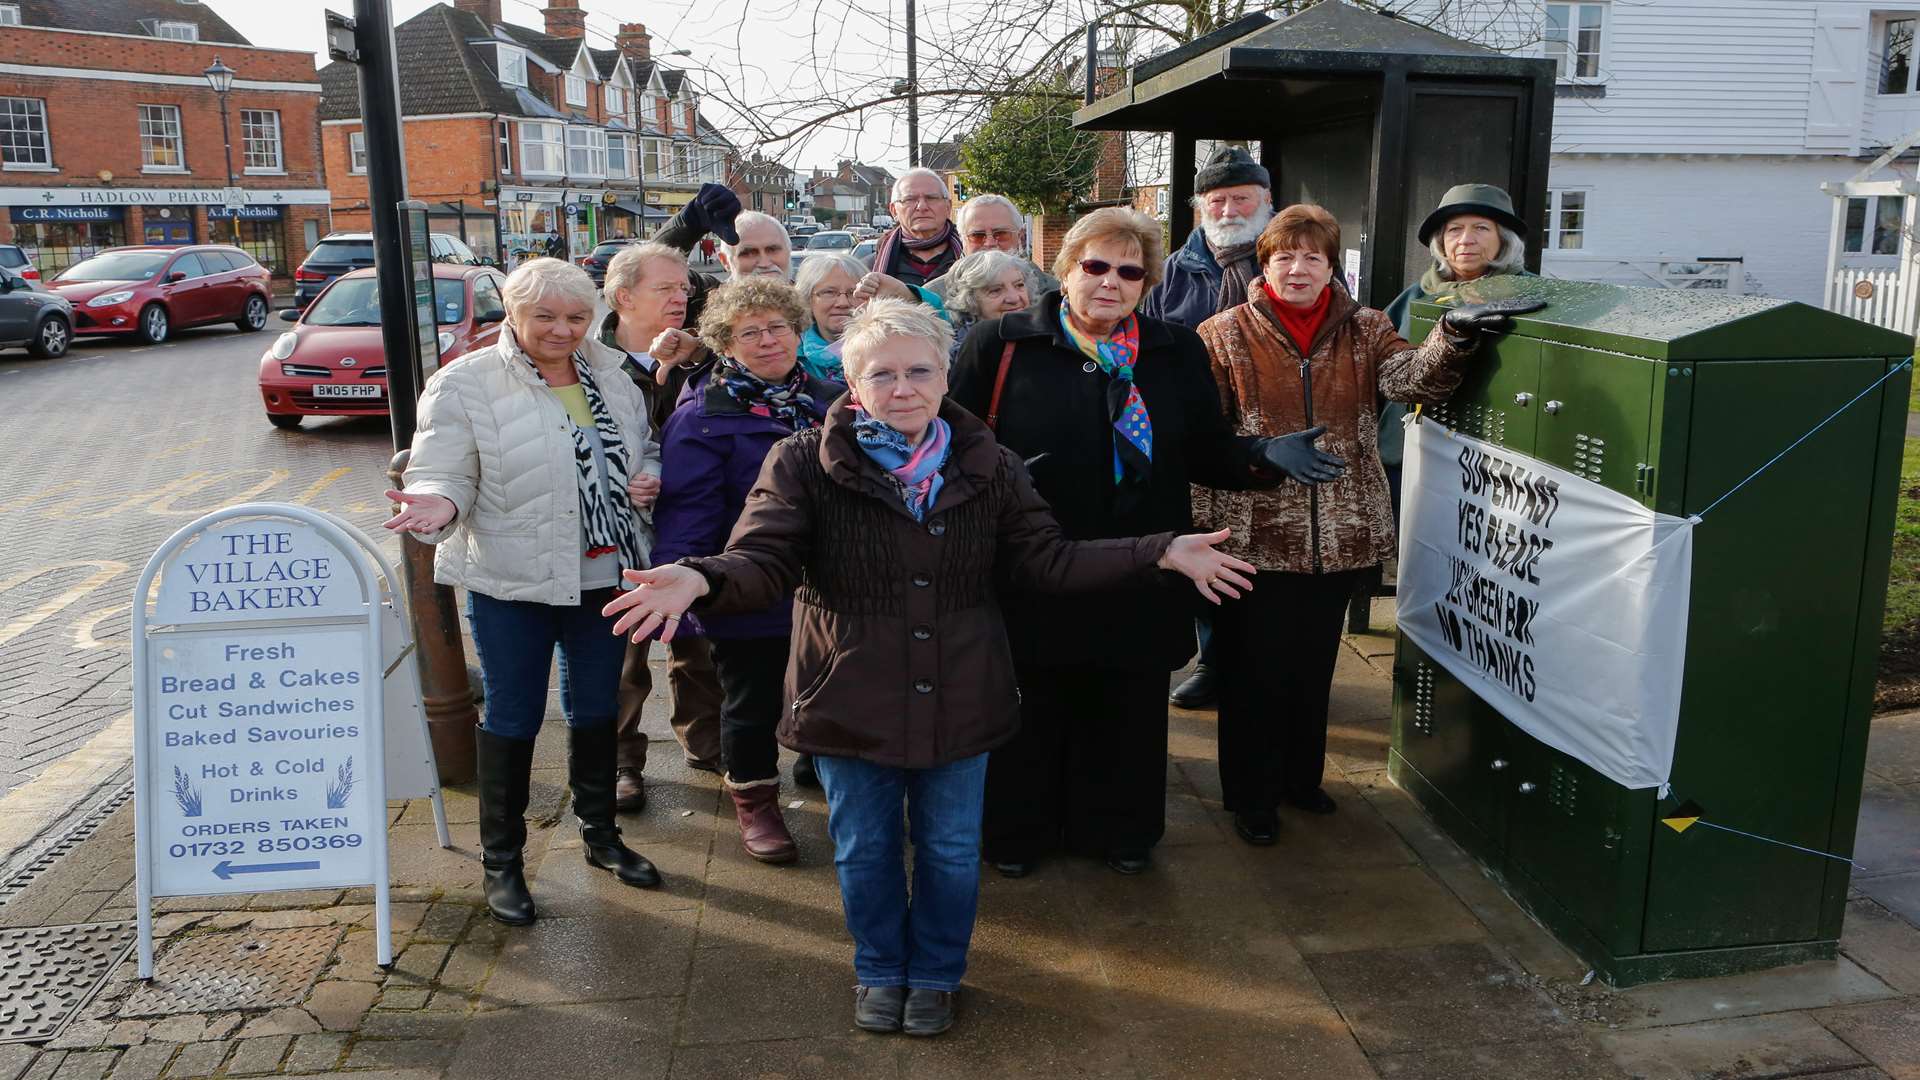 Residents unhappy about a new BT green cabinet set up for fibre optic broadband in Hadlow High Street.